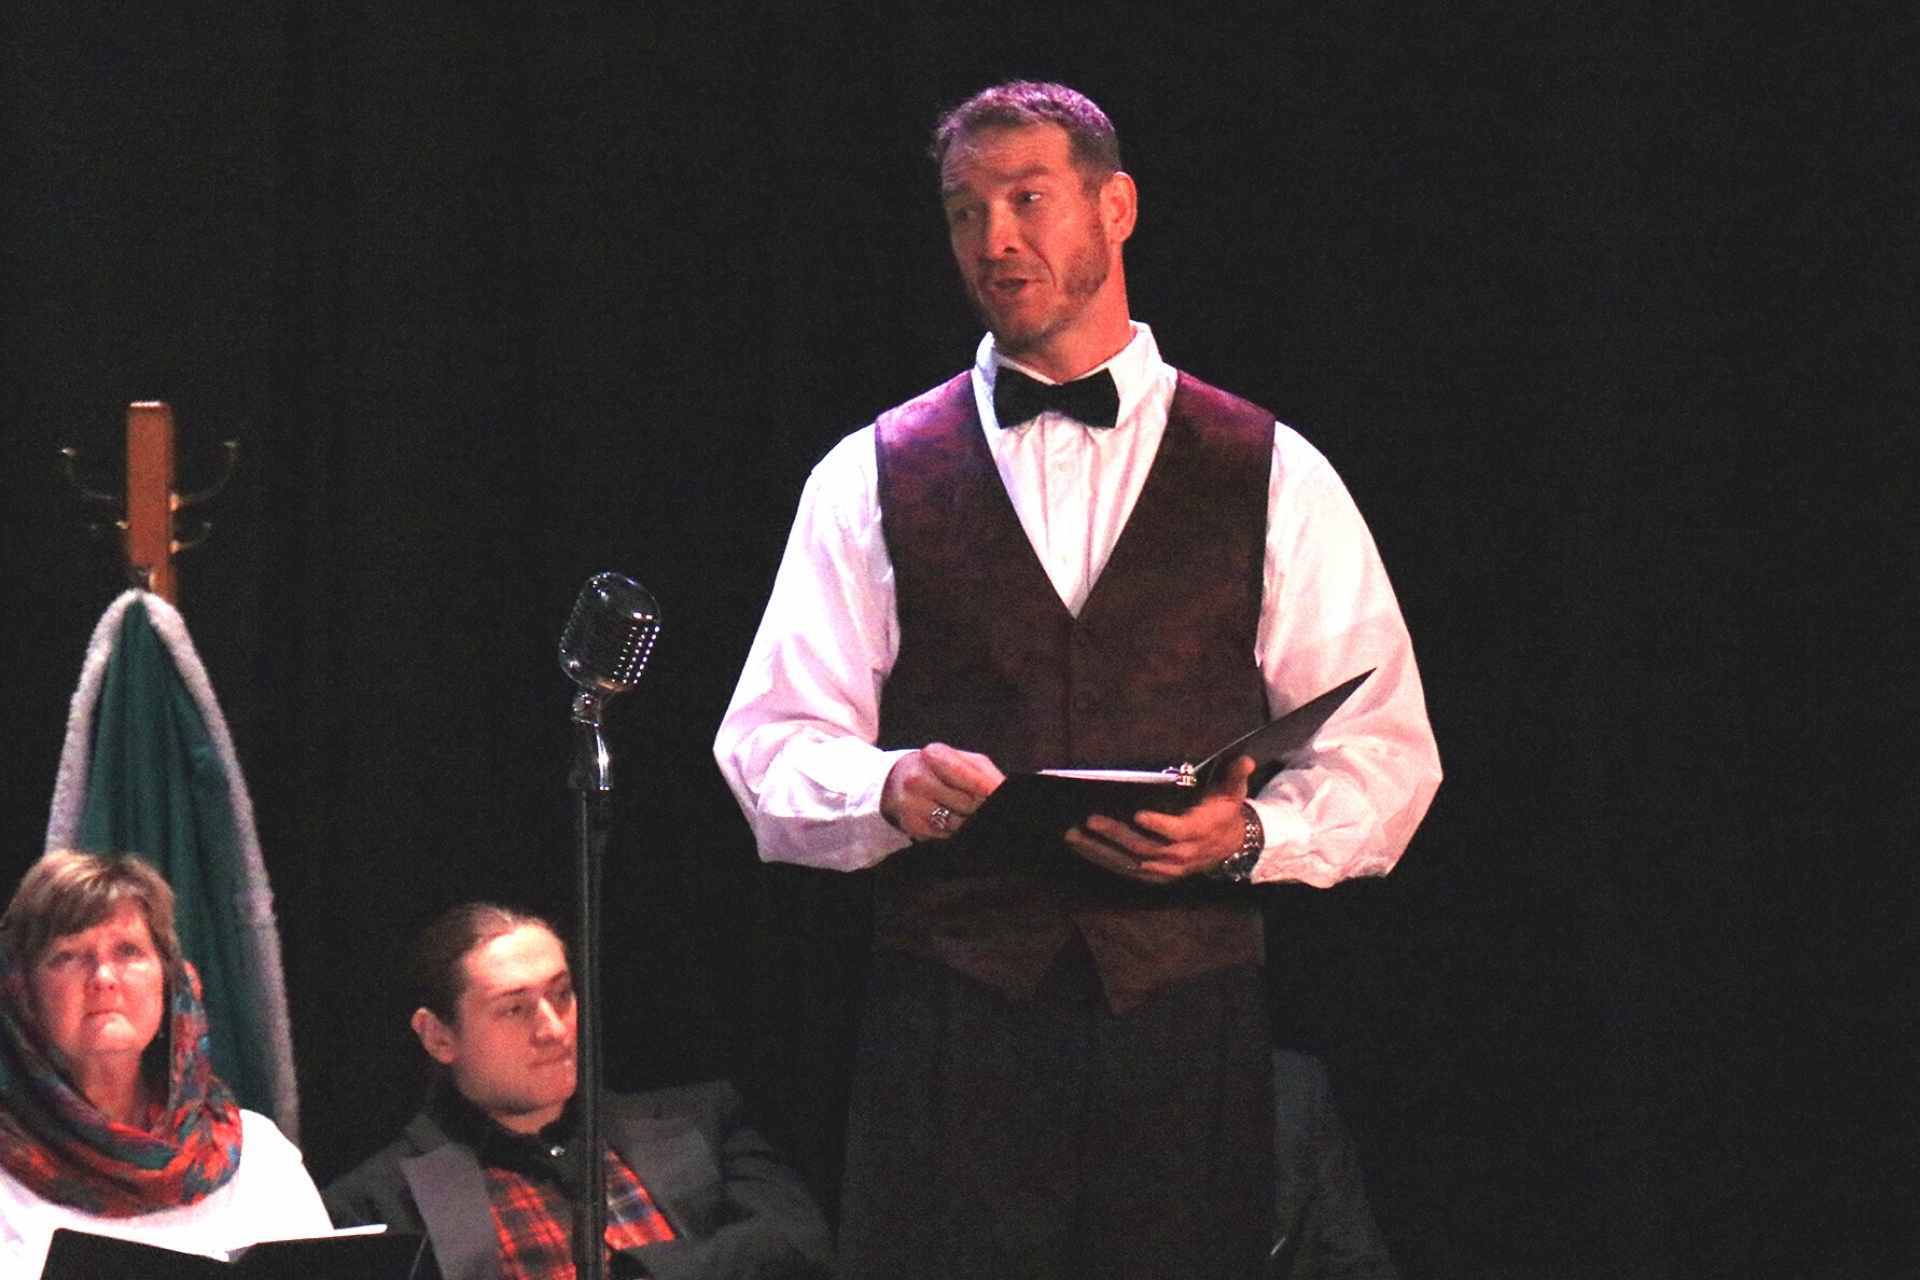 Glenville State College Assistant Professor of Criminal Justice Dr. Donal Hardin at the microphone at a previous reader’s theater production. The Glenville State College Players will perform Arthur Miller’s All My Sons at GSC, April 22-24.